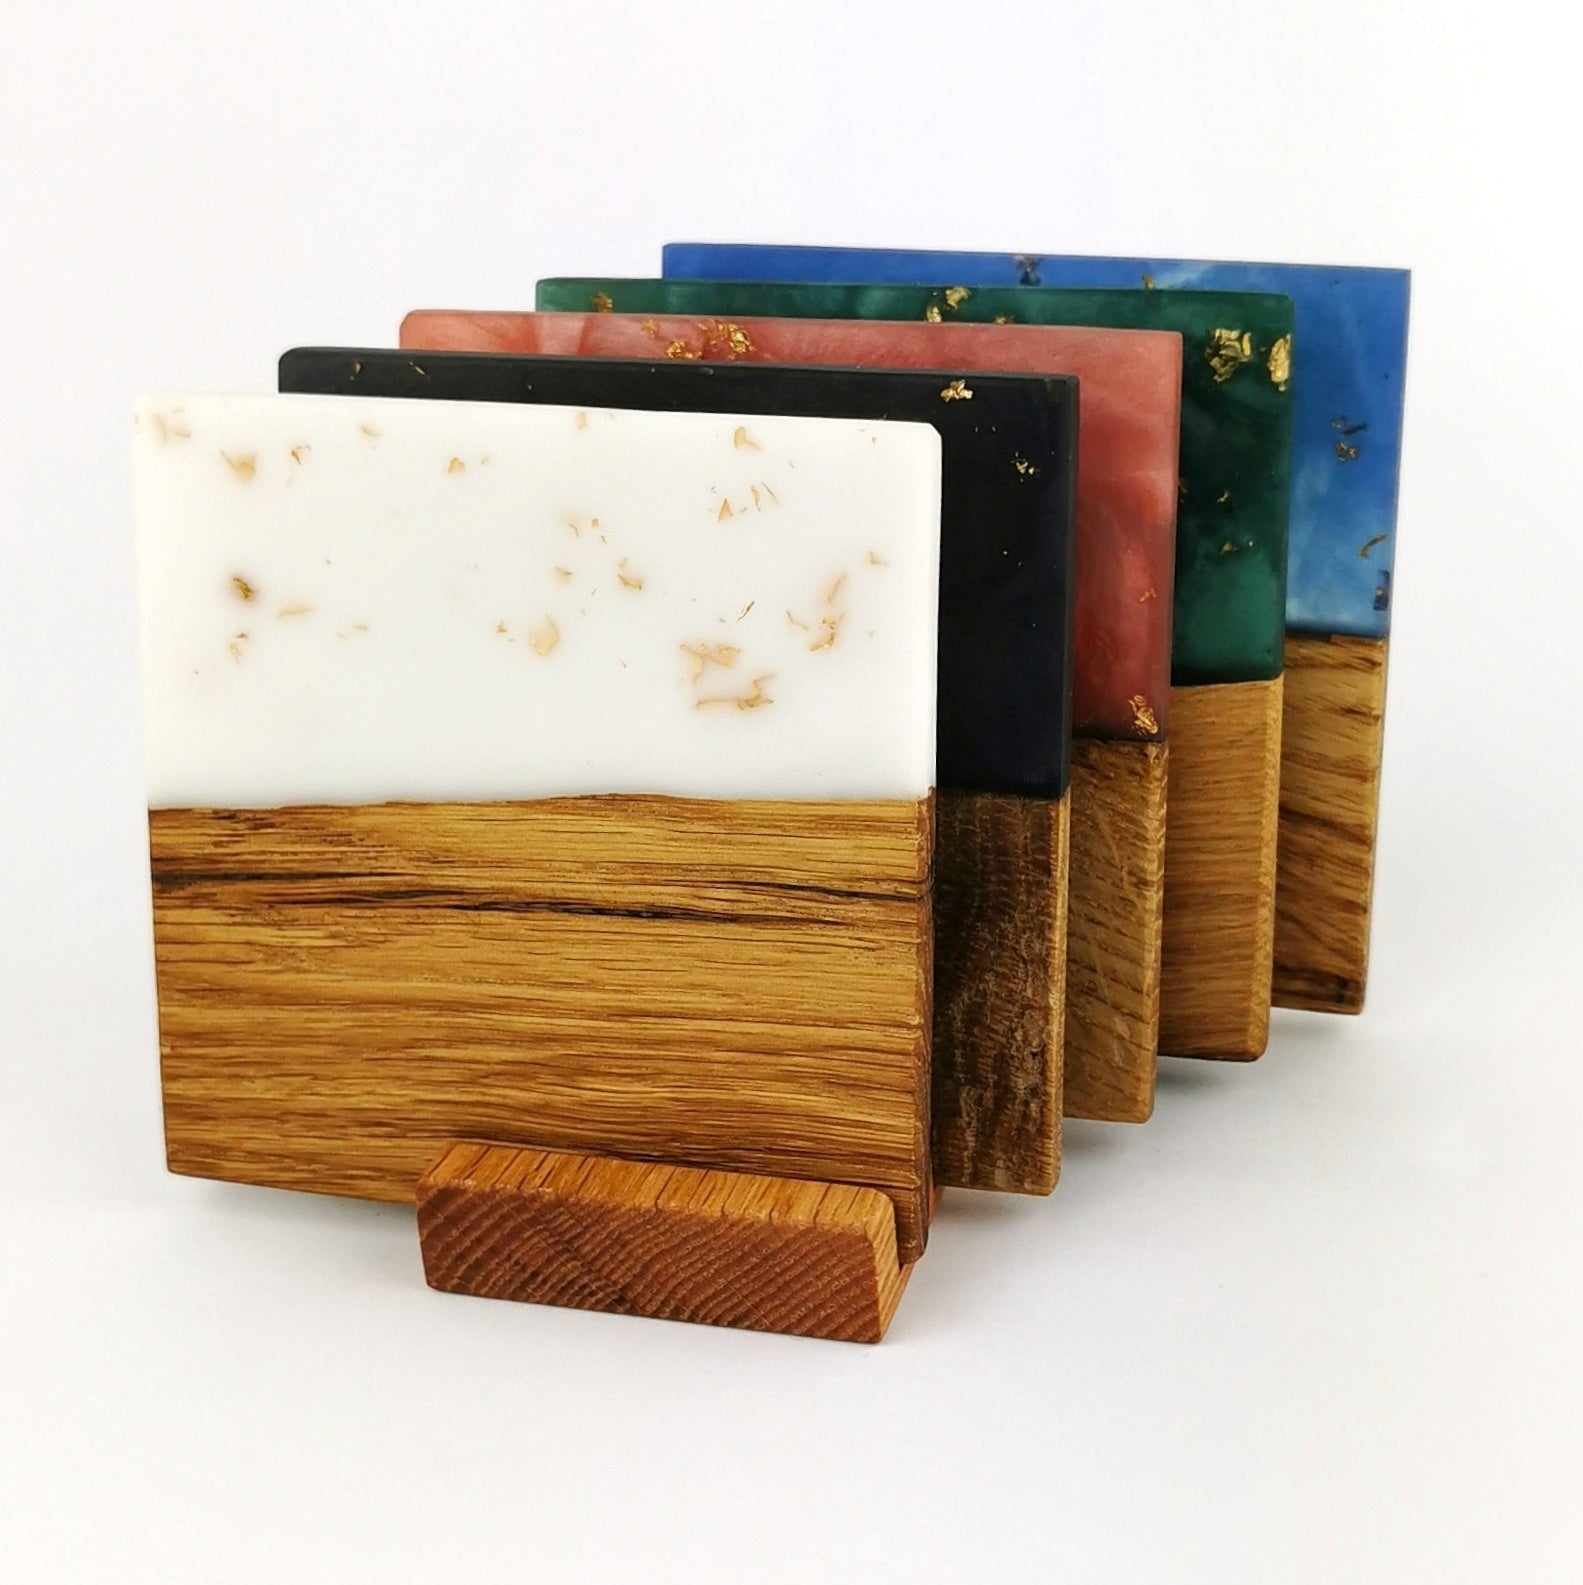 Handcrafted Wooden Drink Coasters, Handmade Epoxy Resin Art,Gift For Her  /Him